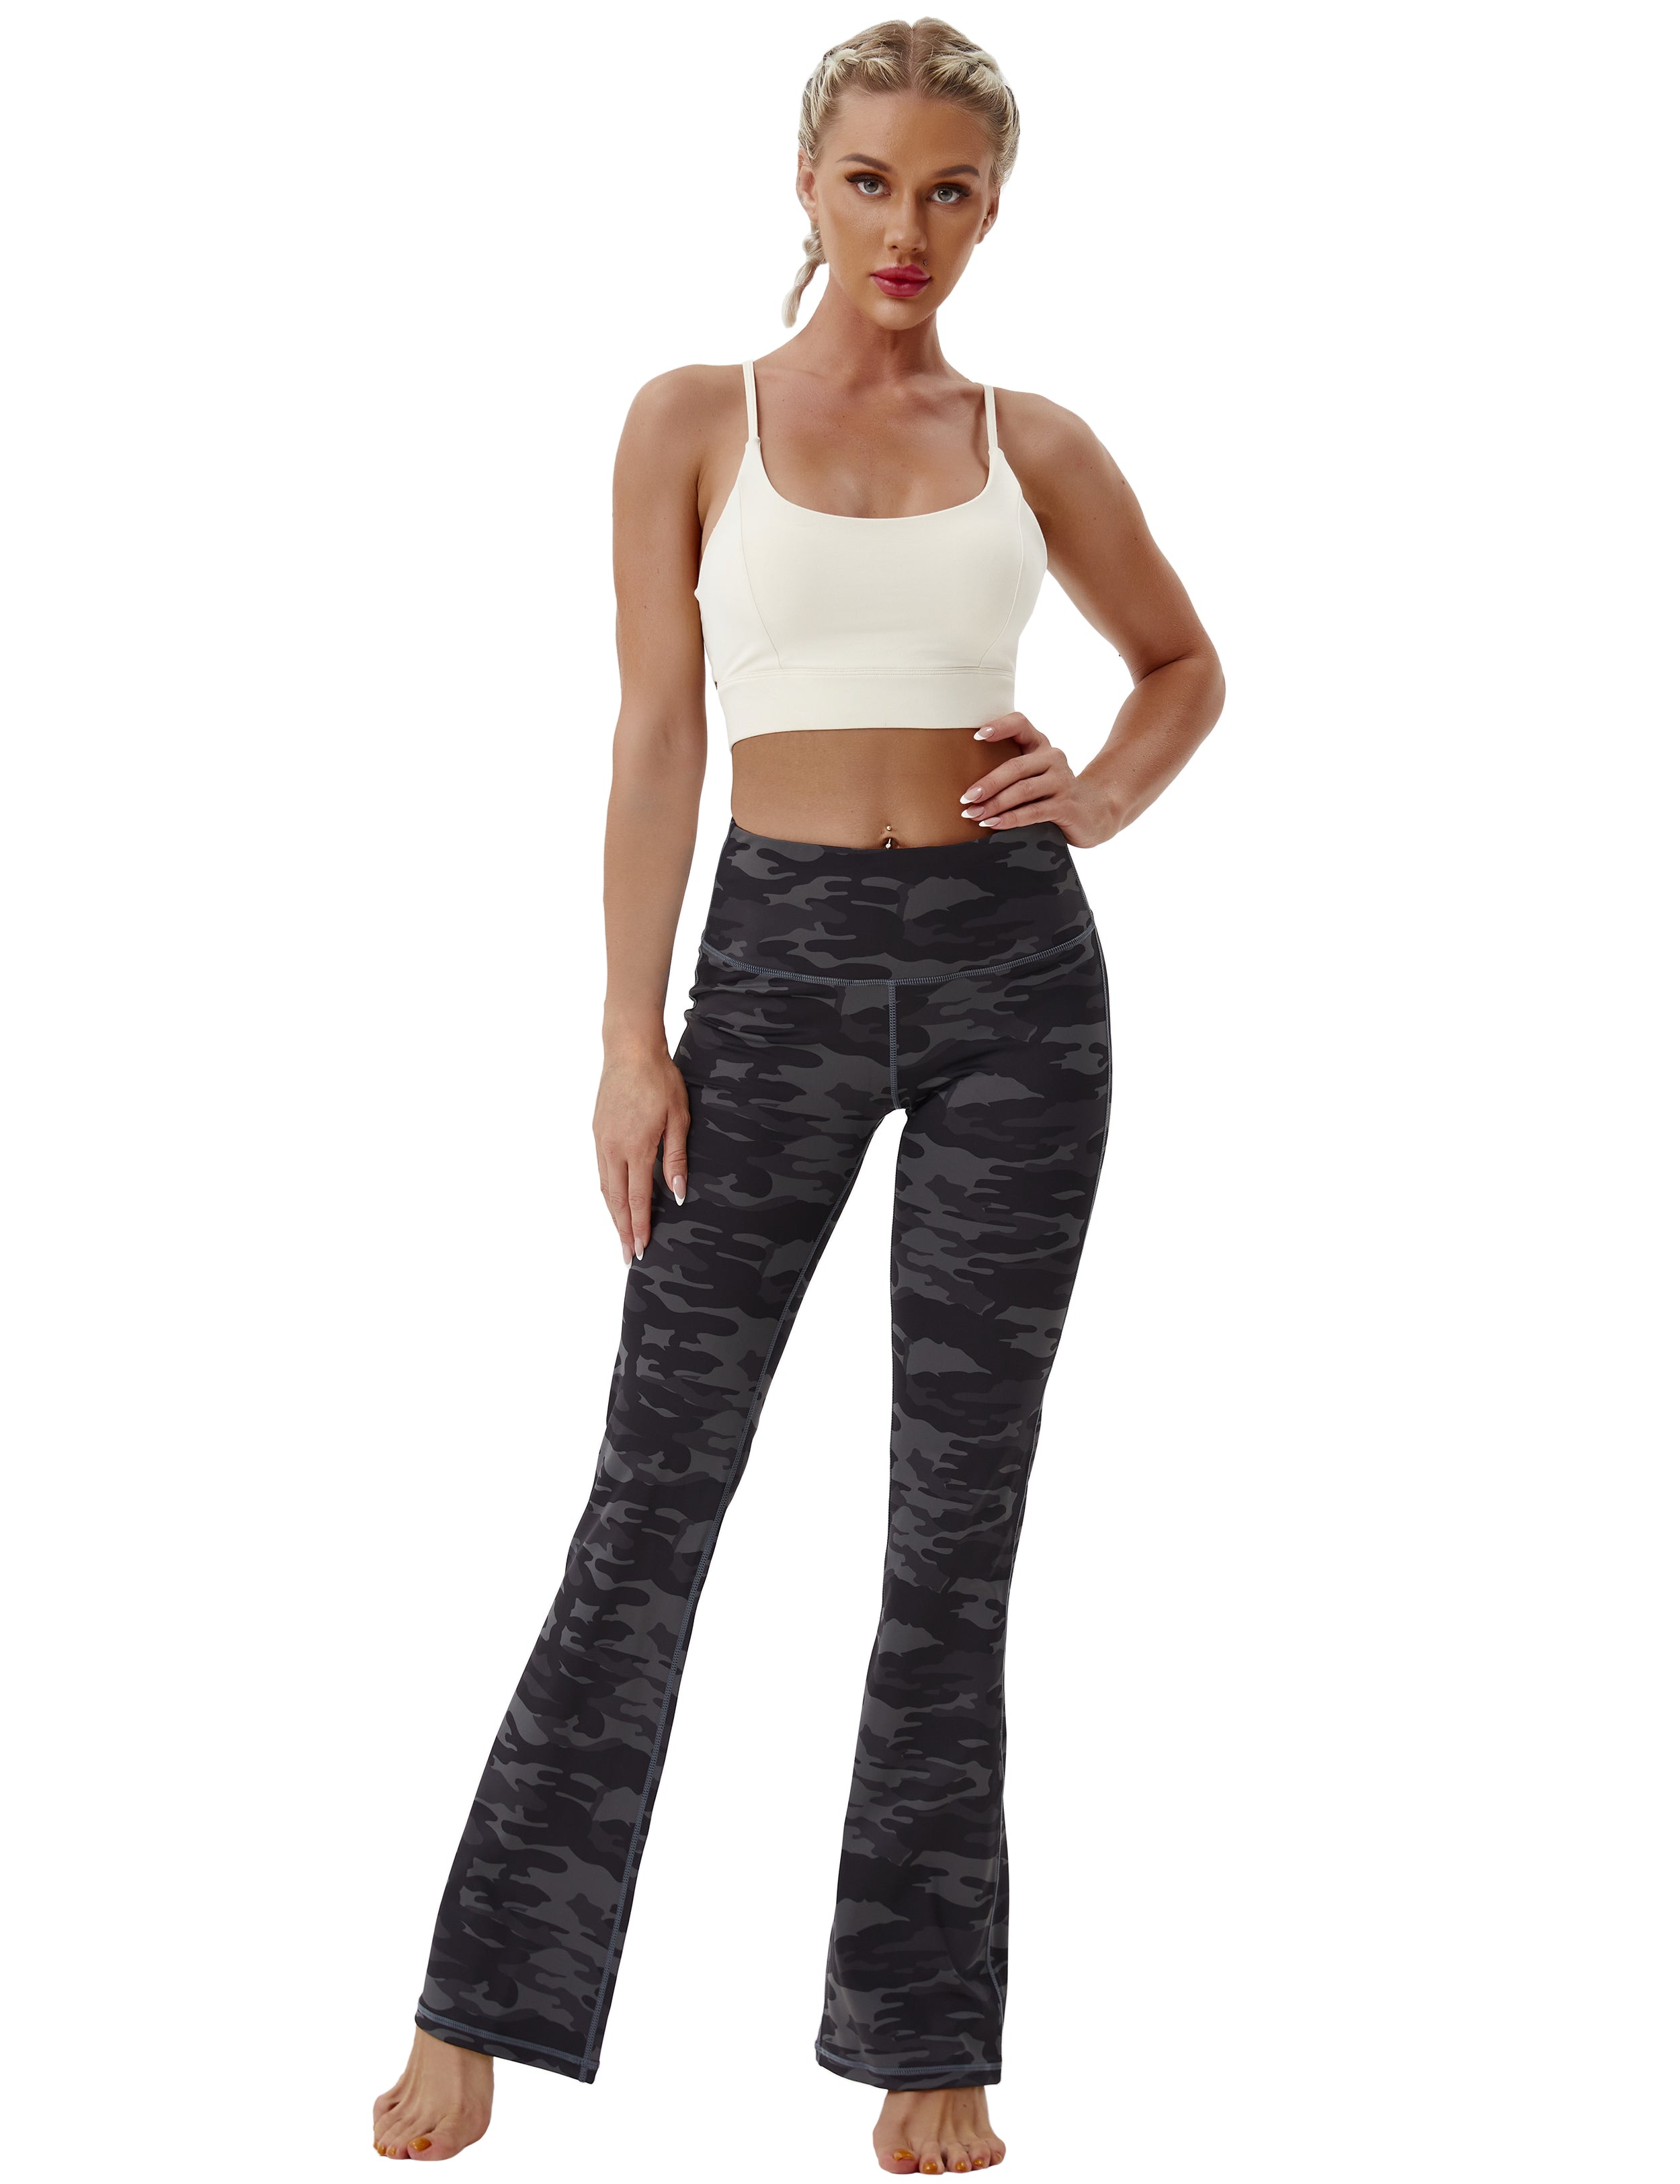 High Waist Printed Bootcut Leggings dimgray camo 78%Polyester/22%Spandex Fabric doesn't attract lint easily 4-way stretch No see-through Moisture-wicking Tummy control Inner pocket Five lengths